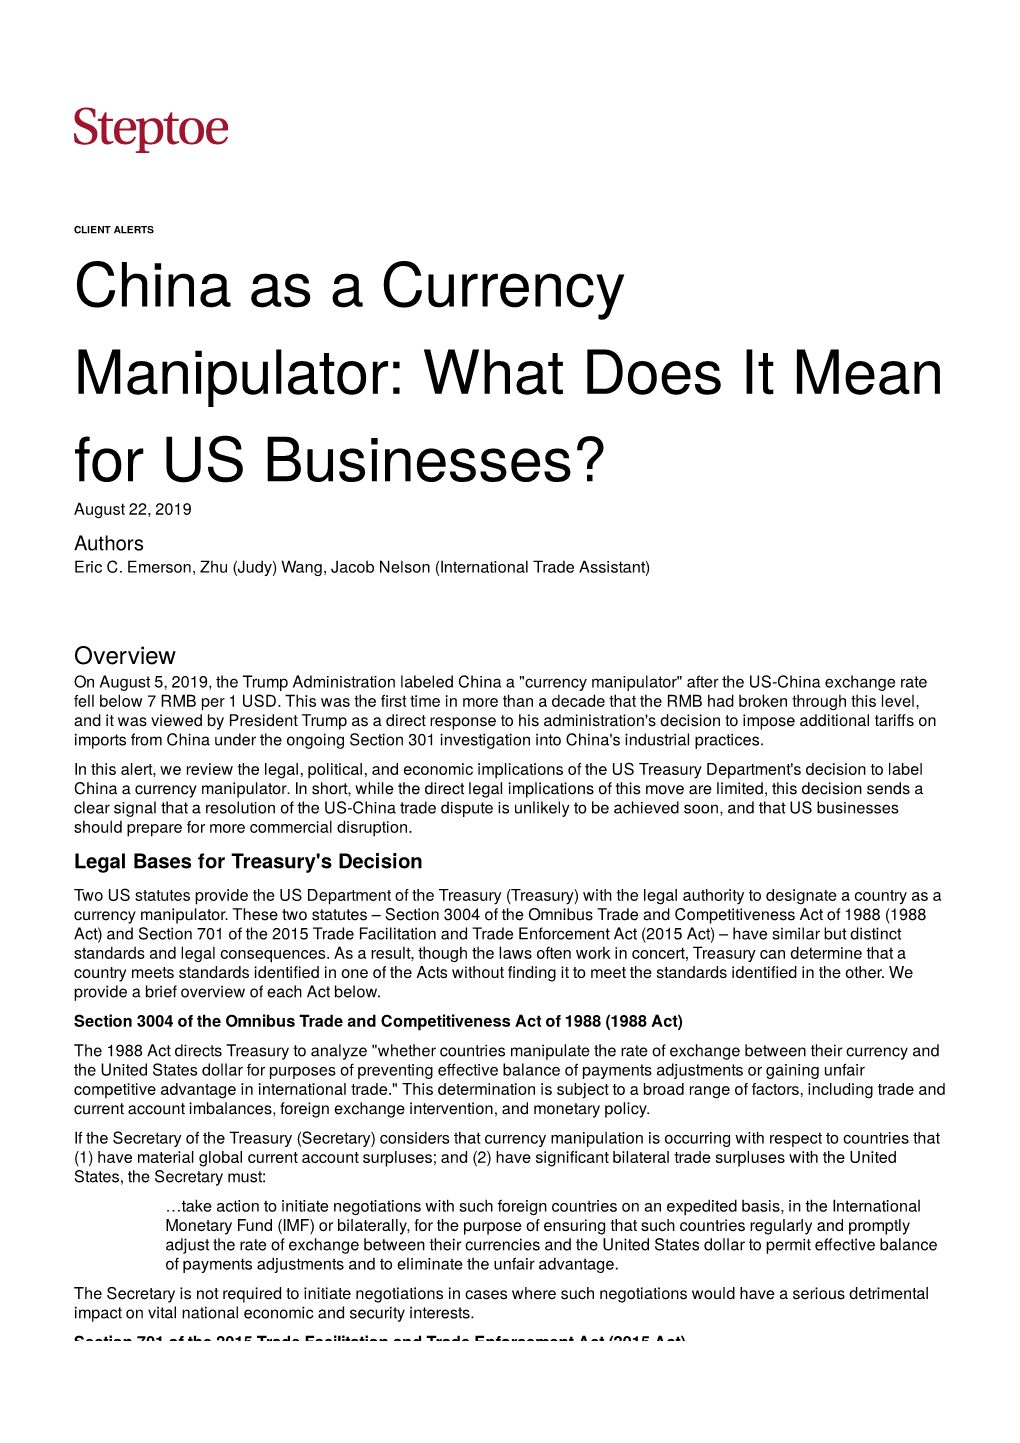 China As a Currency Manipulator: What Does It Mean for US Businesses?